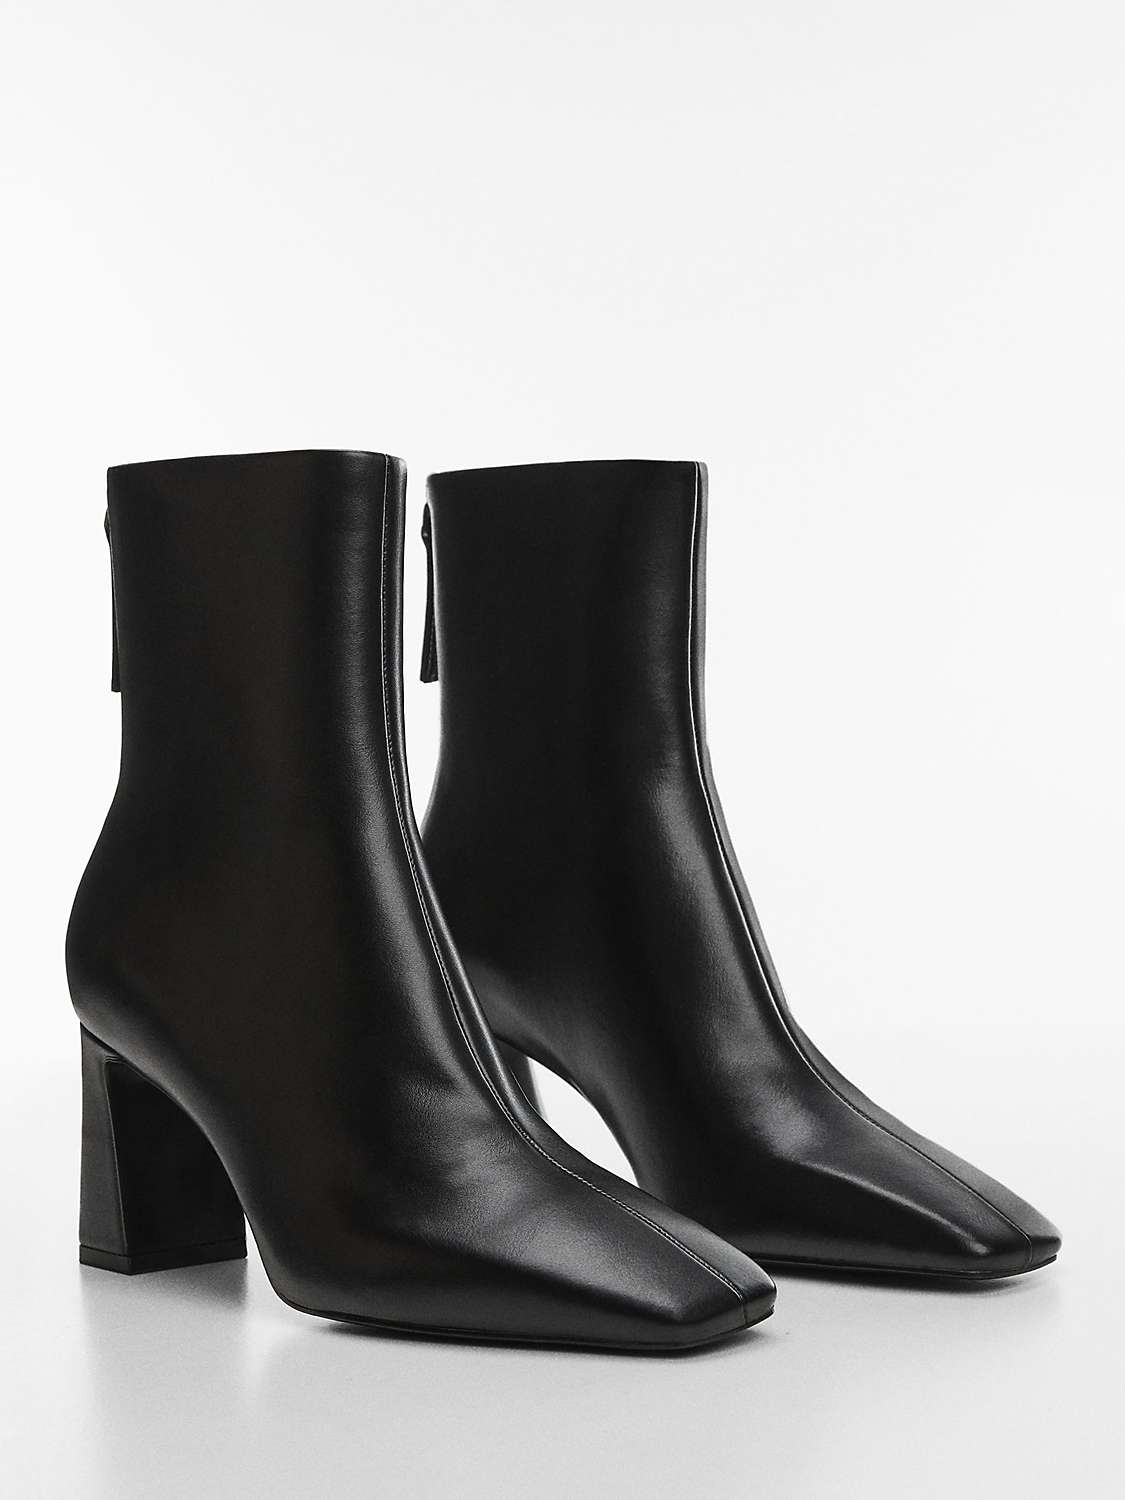 Buy Mango Limo Faux Leather Zip Up Ankle Boot Online at johnlewis.com